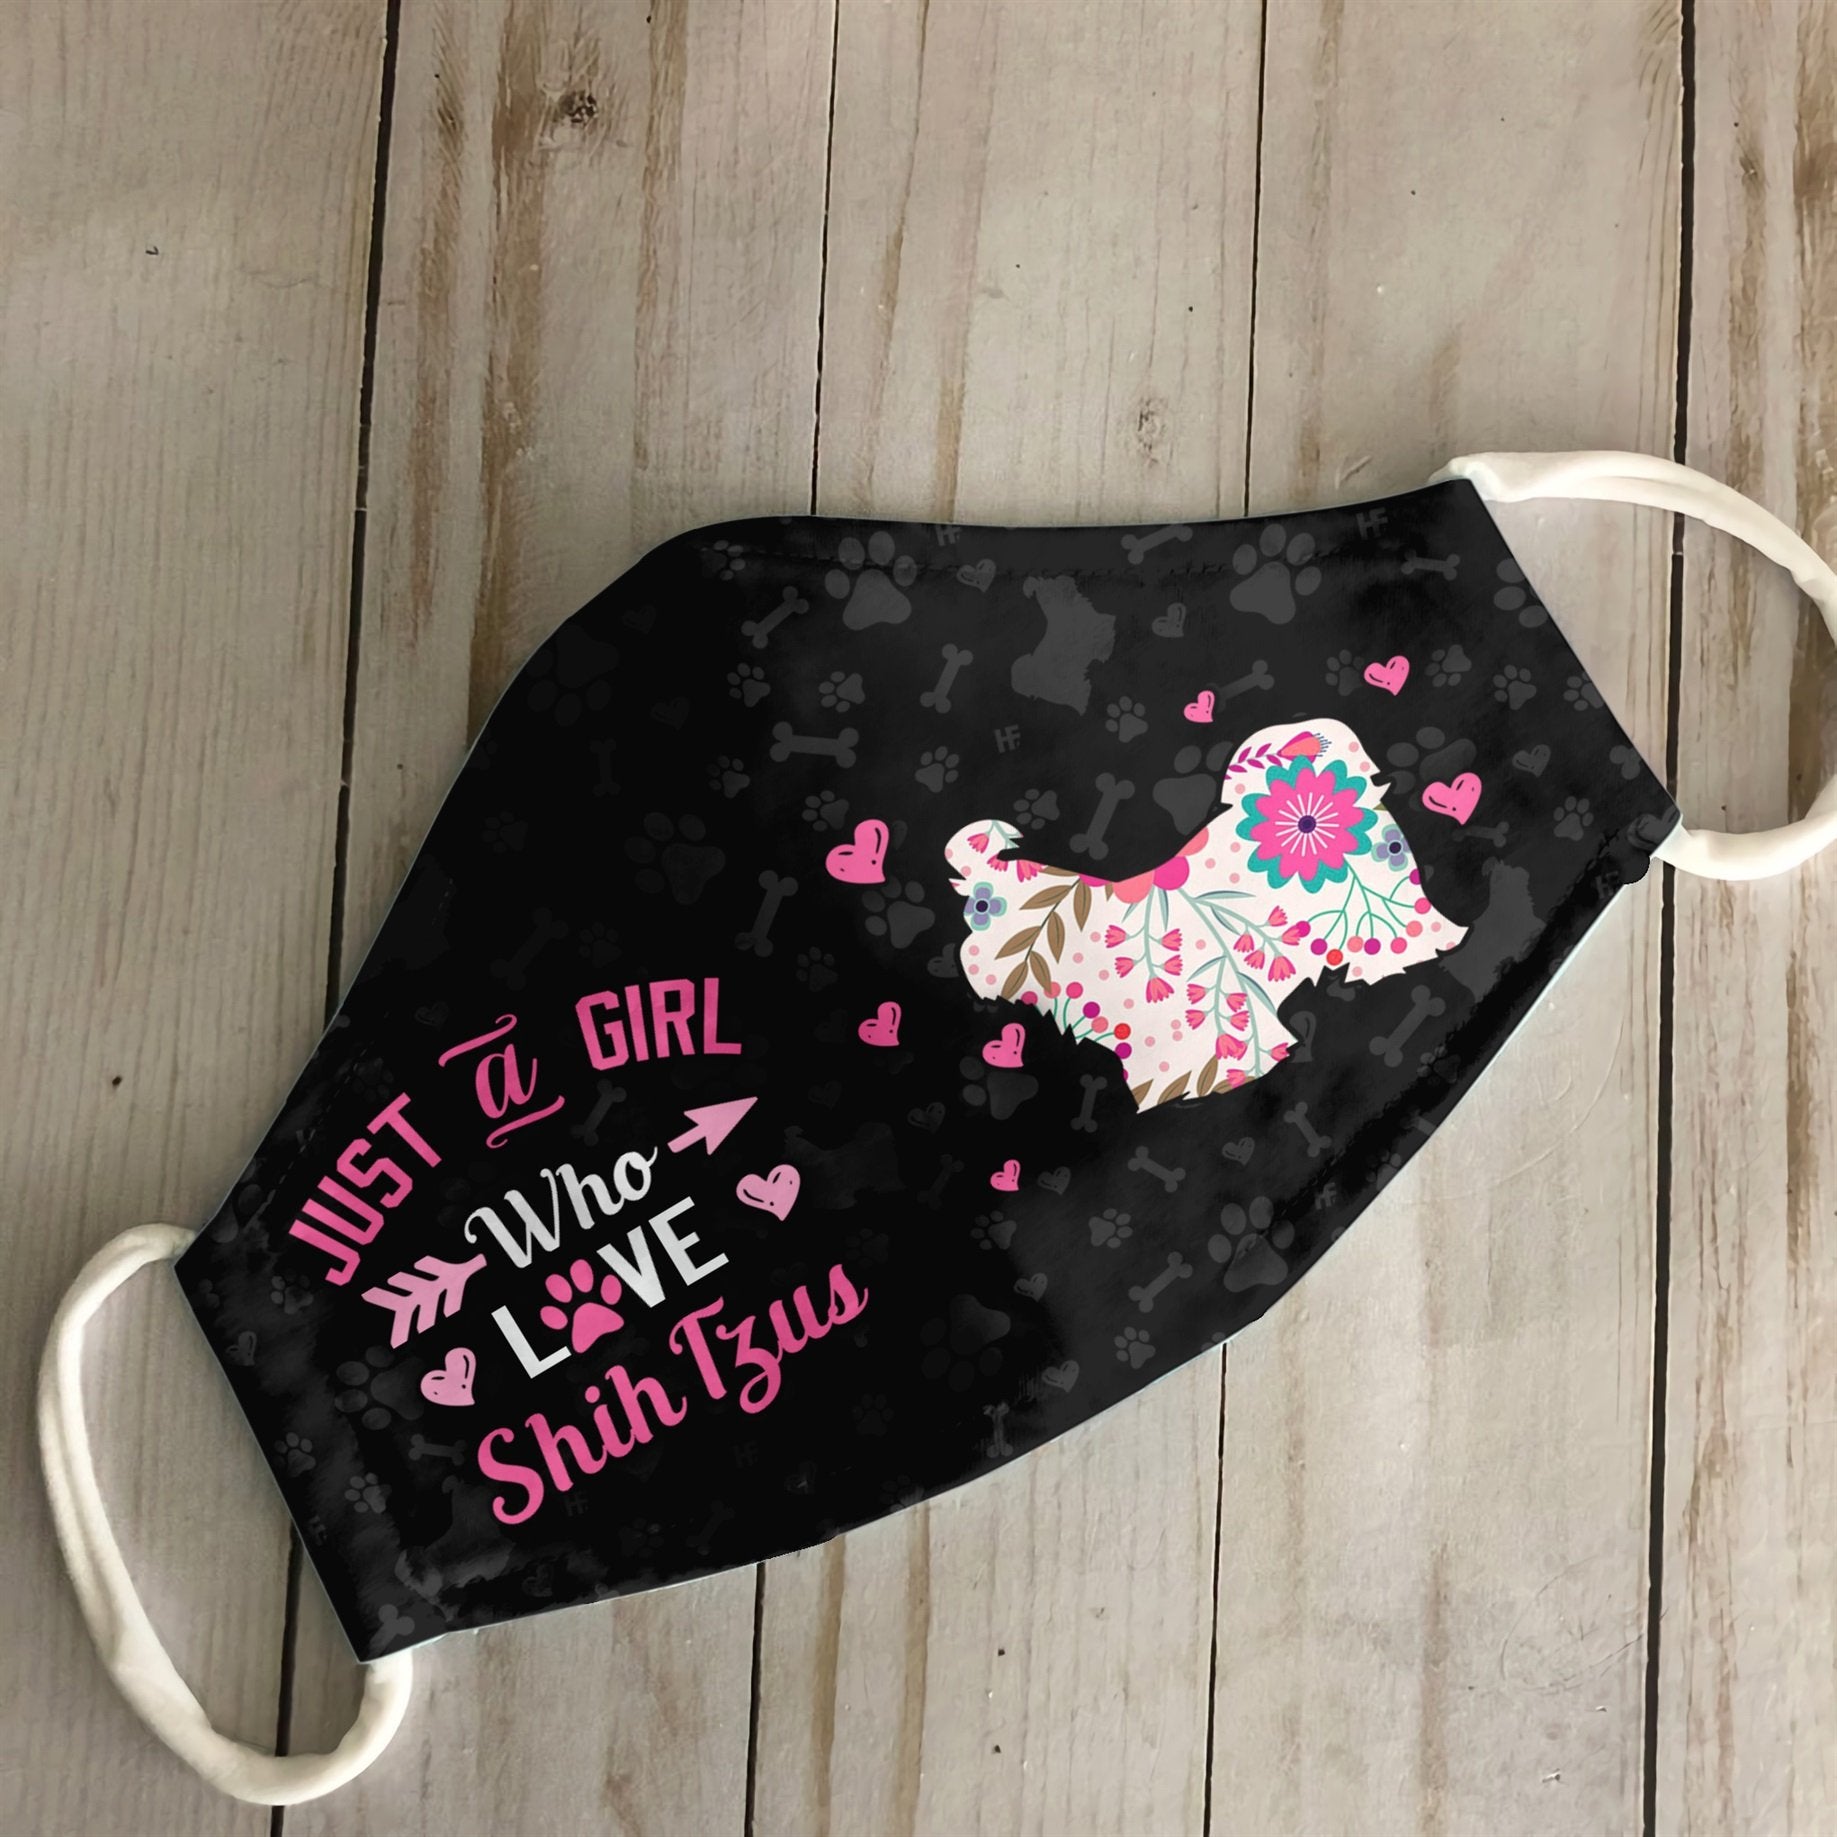 Just A Girl Who Loves Shih Tzus EZ07 3107 Face Mask